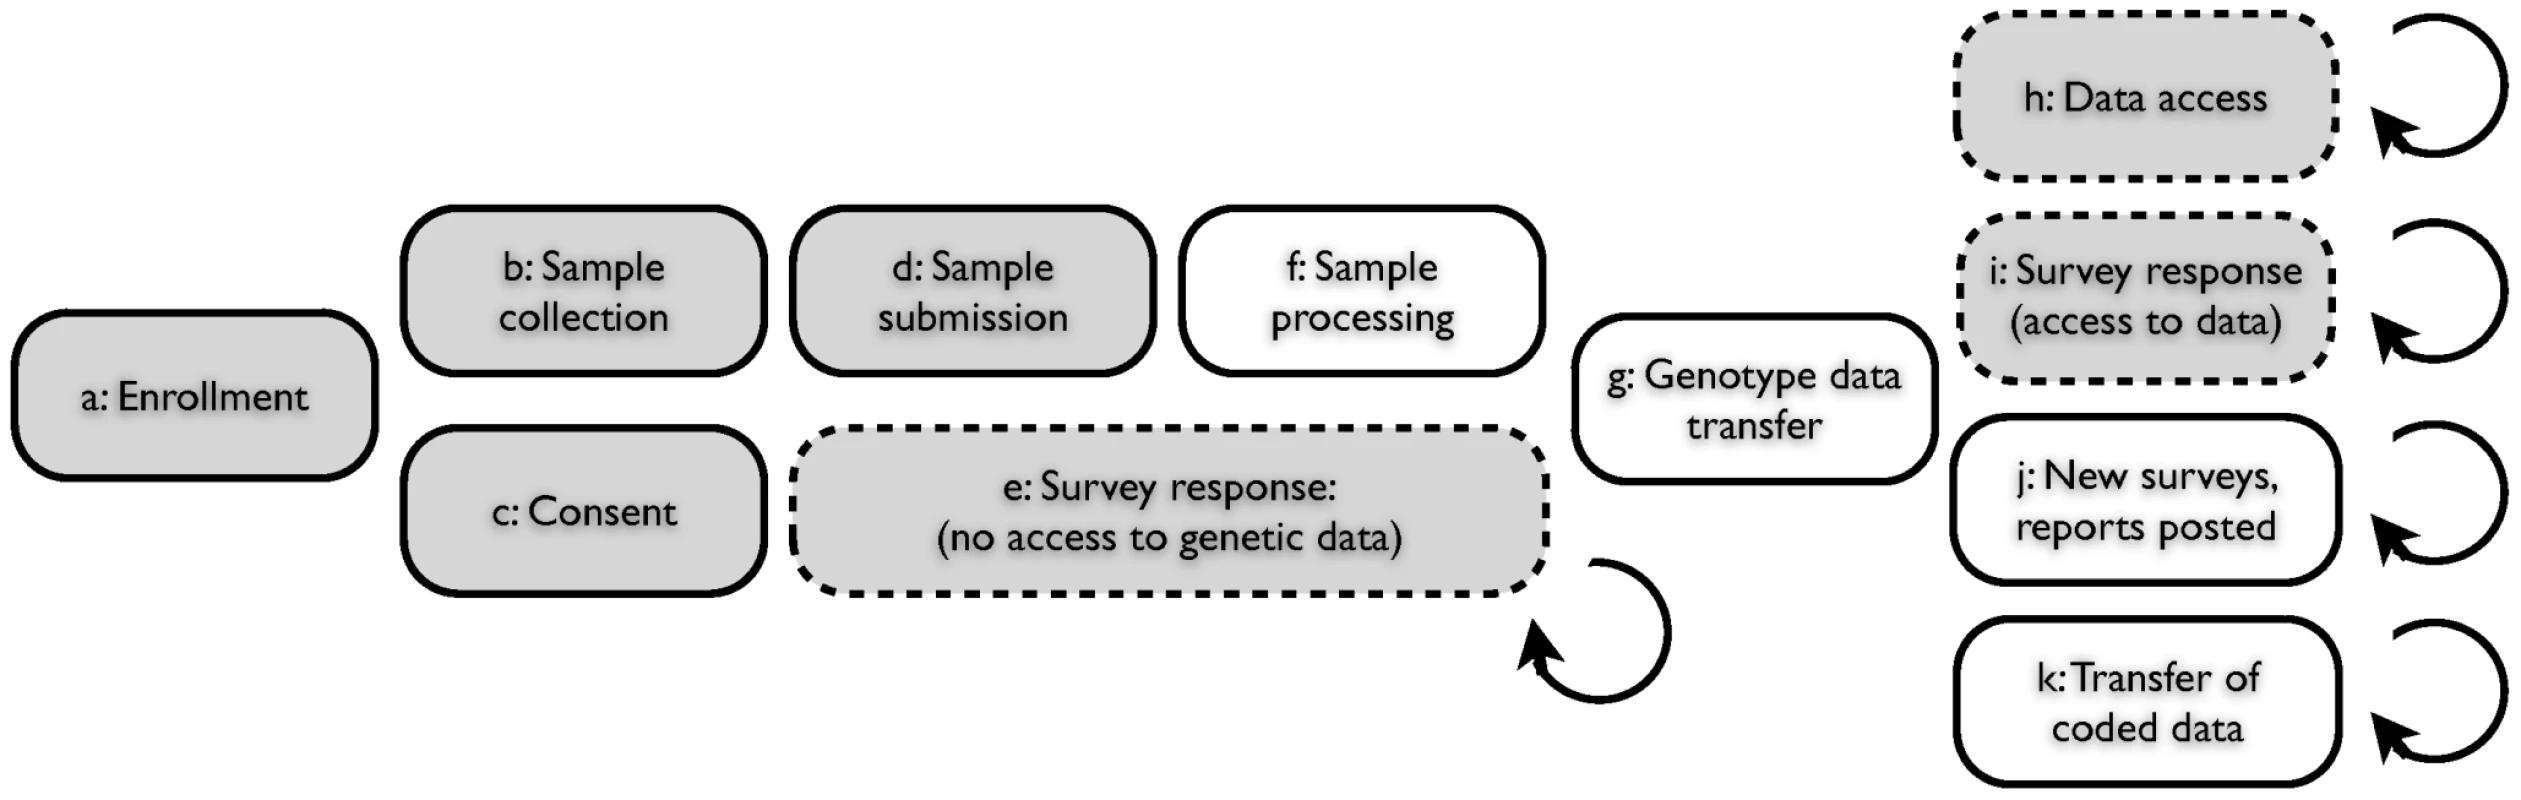 Web-based accrual of genotype and phenotype data via a personal genetic information service.